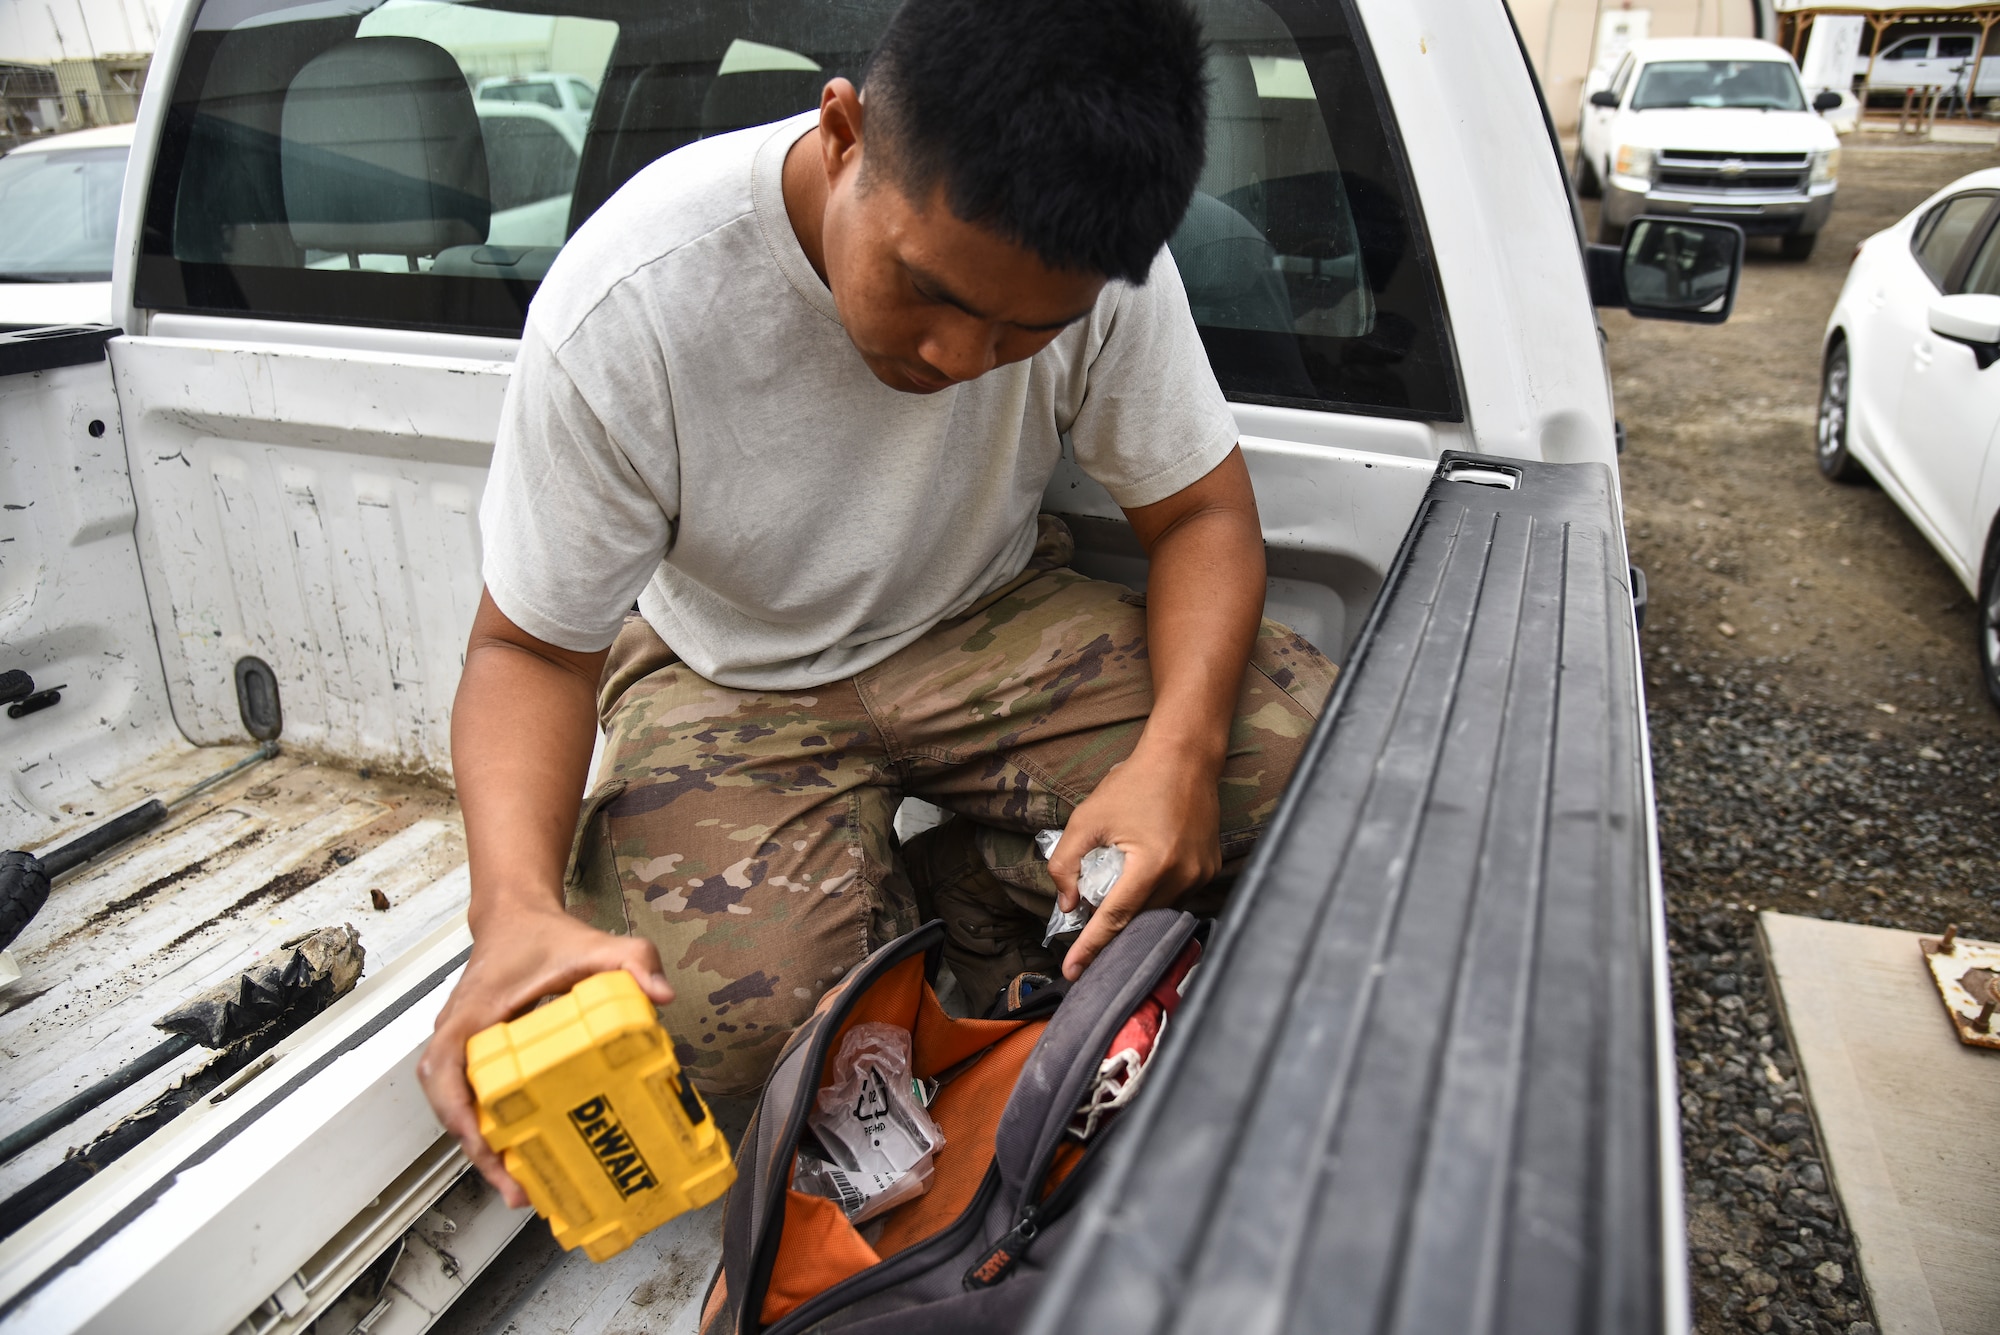 Staff Sgt. Ricky Hipolito, 380th Expeditionary Civil Engineer Squadron Heating, Ventilation, Air Conditioning and Refrigeration journeyman, searches through his tool bag at Al Dhafra Air Base, United Arab Emirates, April 8, 2019. HVAC Airmen perform recurring maintenance and seasonal overhaul on systems and components. (U.S. Air Force photo by Senior Airman Mya M. Crosby)